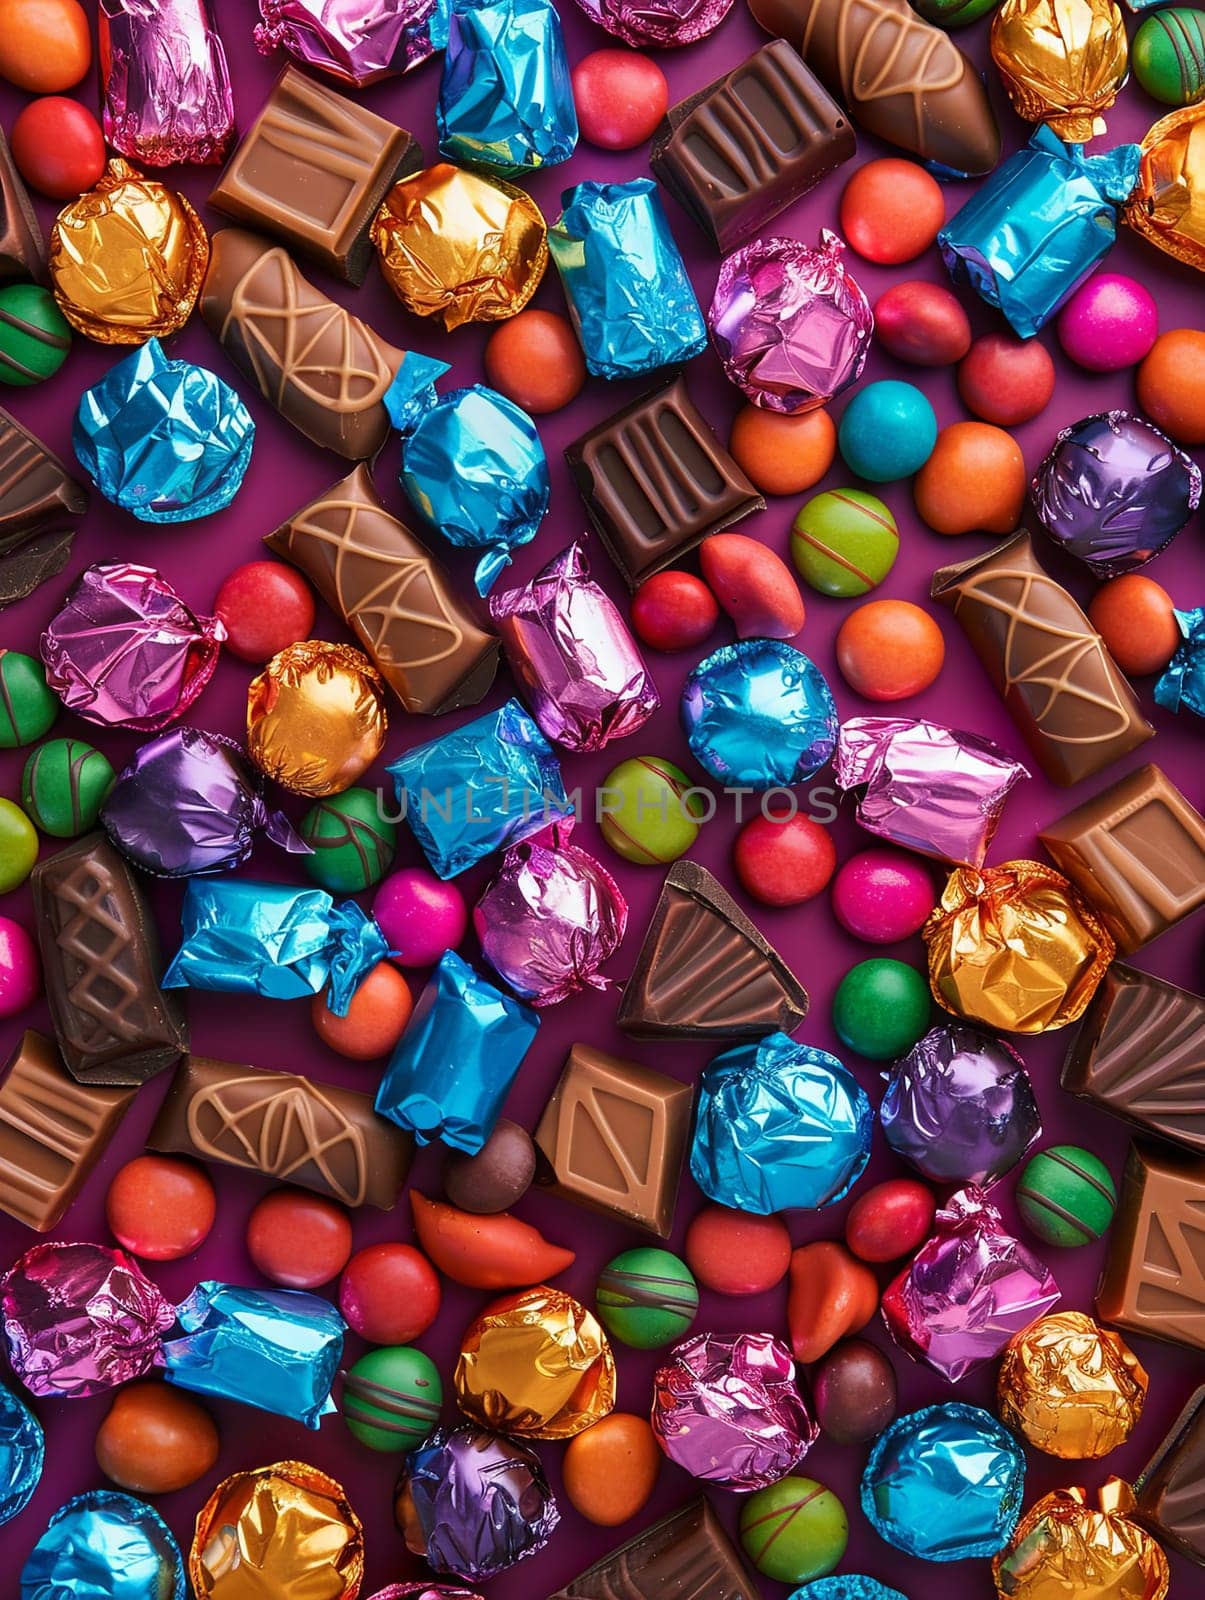 Various colorful chocolate candies with shiny wrappers scattered on a purple background.